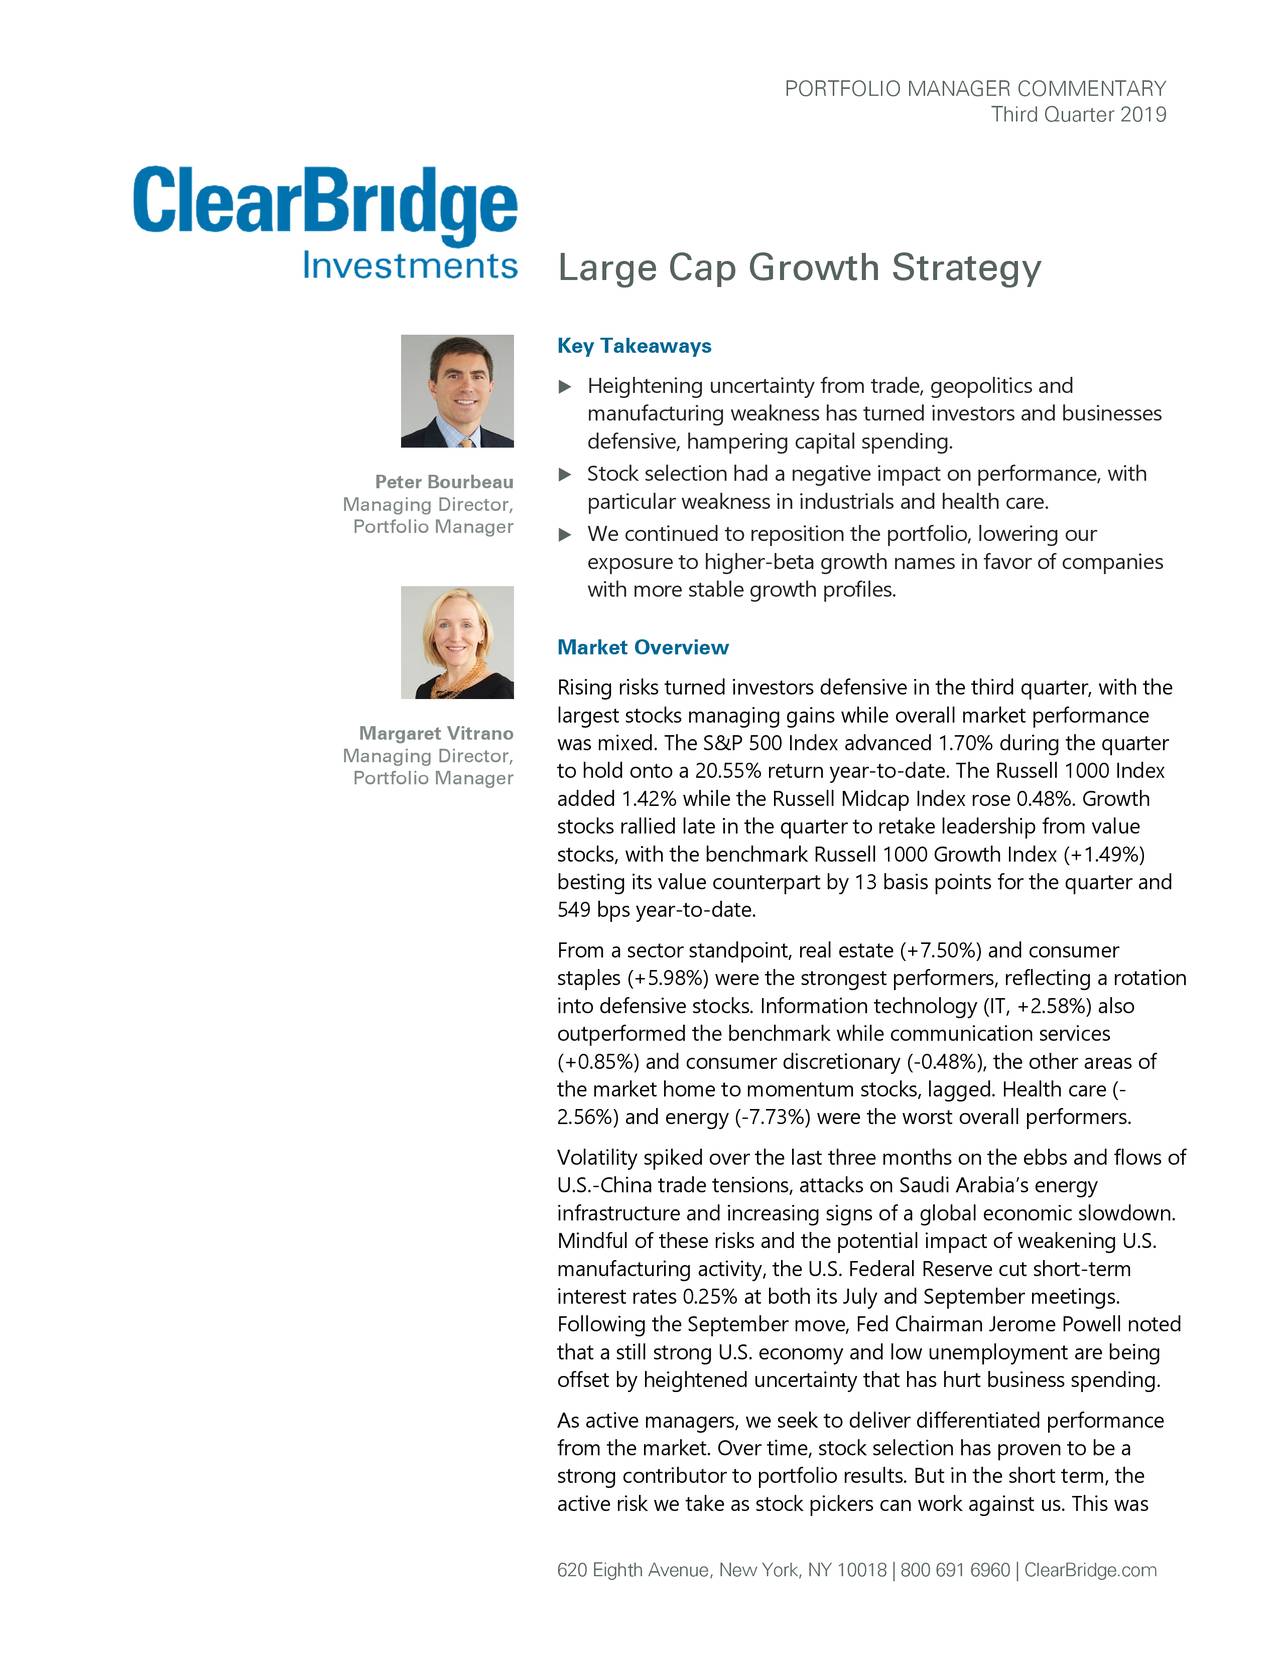 ClearBridge Large Cap Growth Strategy Portfolio Manager Commentary Q3 2019 | Seeking Alpha1280 x 1656